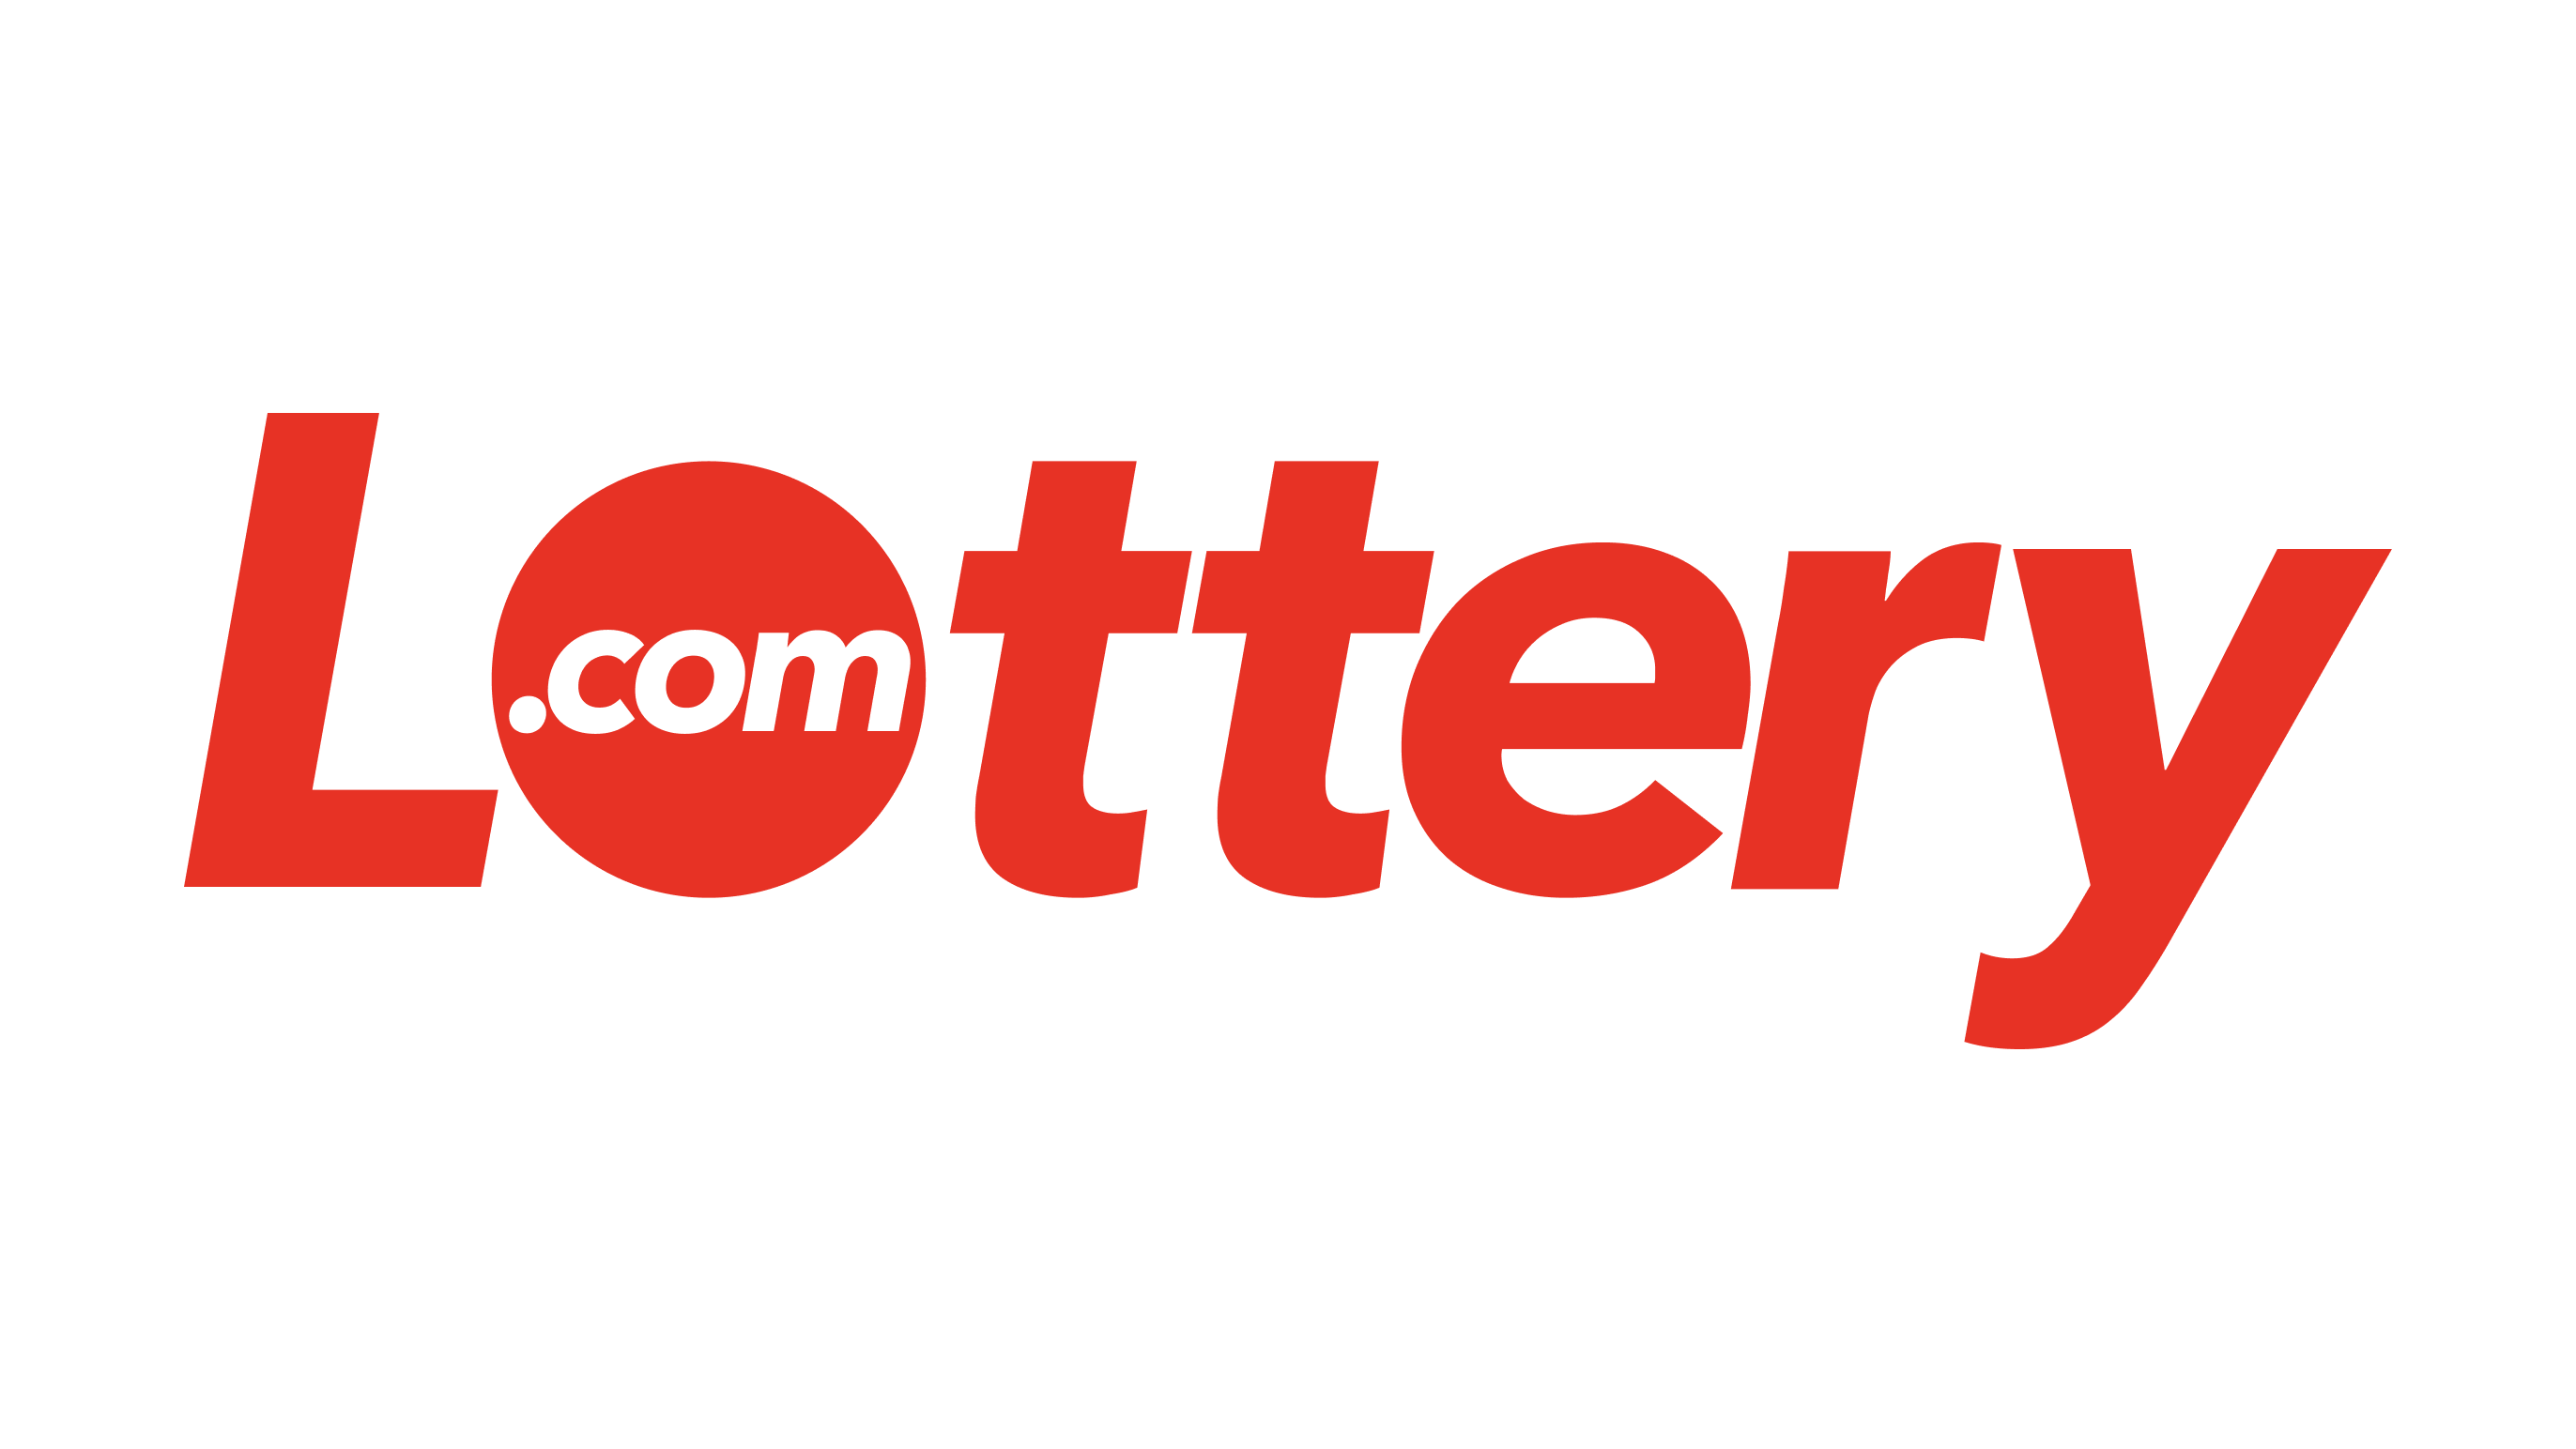 lottery.com-shareholders-overwhelmingly-approve-reverse-stock-split-at-annual-meeting